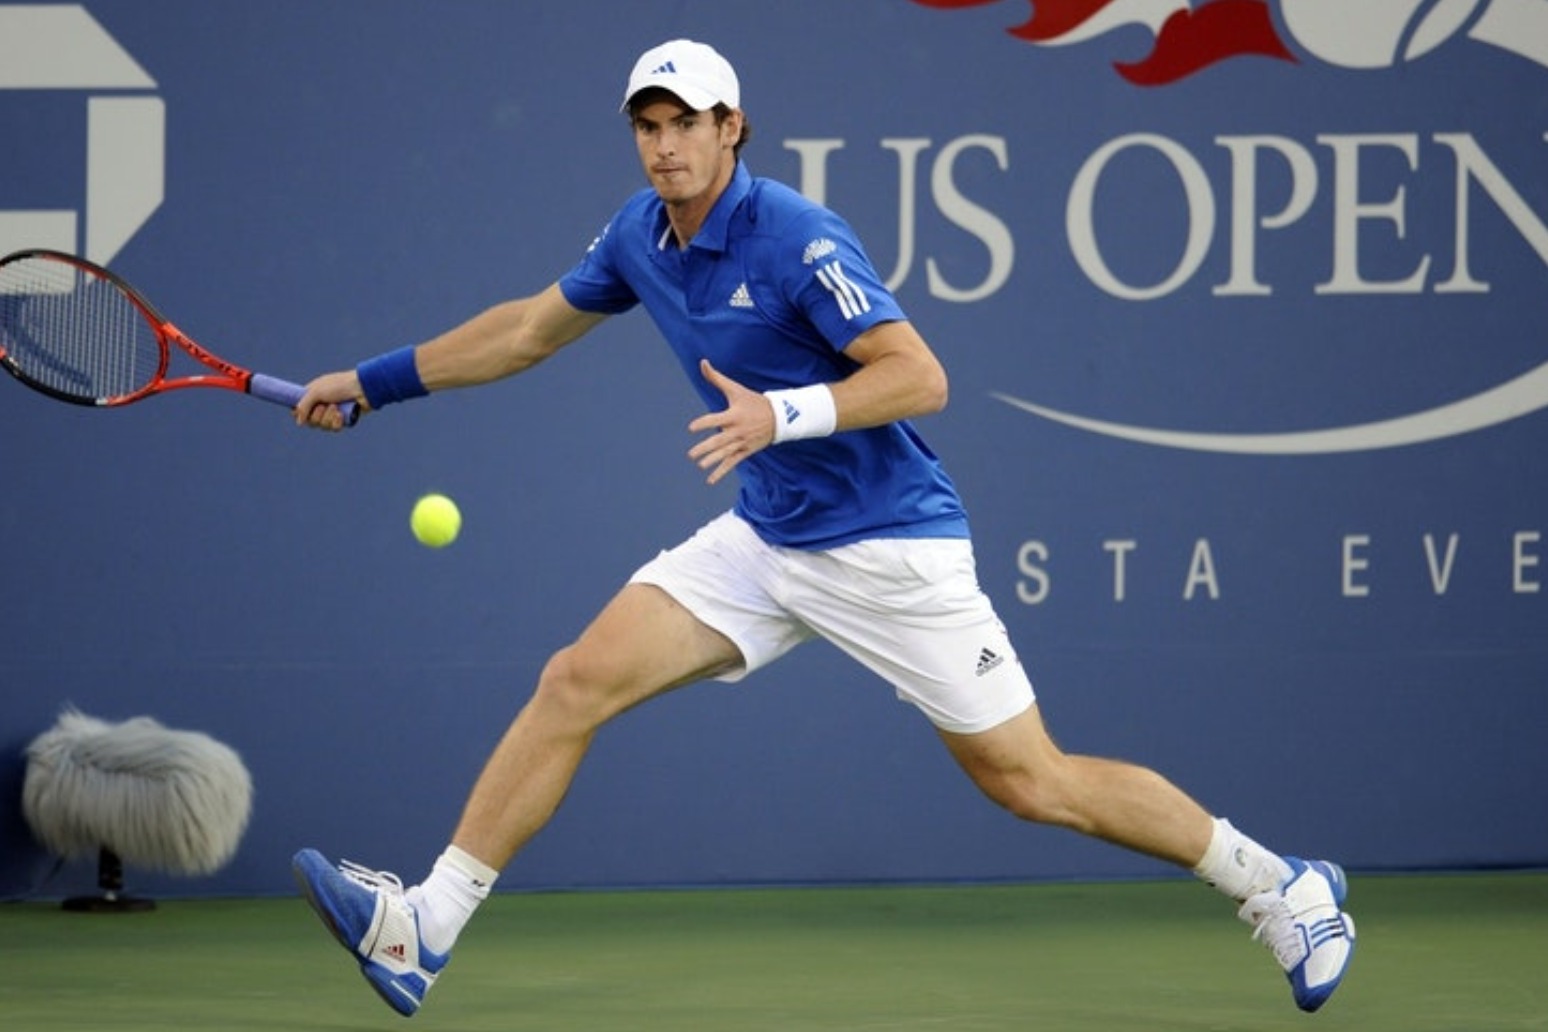 Andy Murray knocked out in straight sets by Milos Raonic in New York 